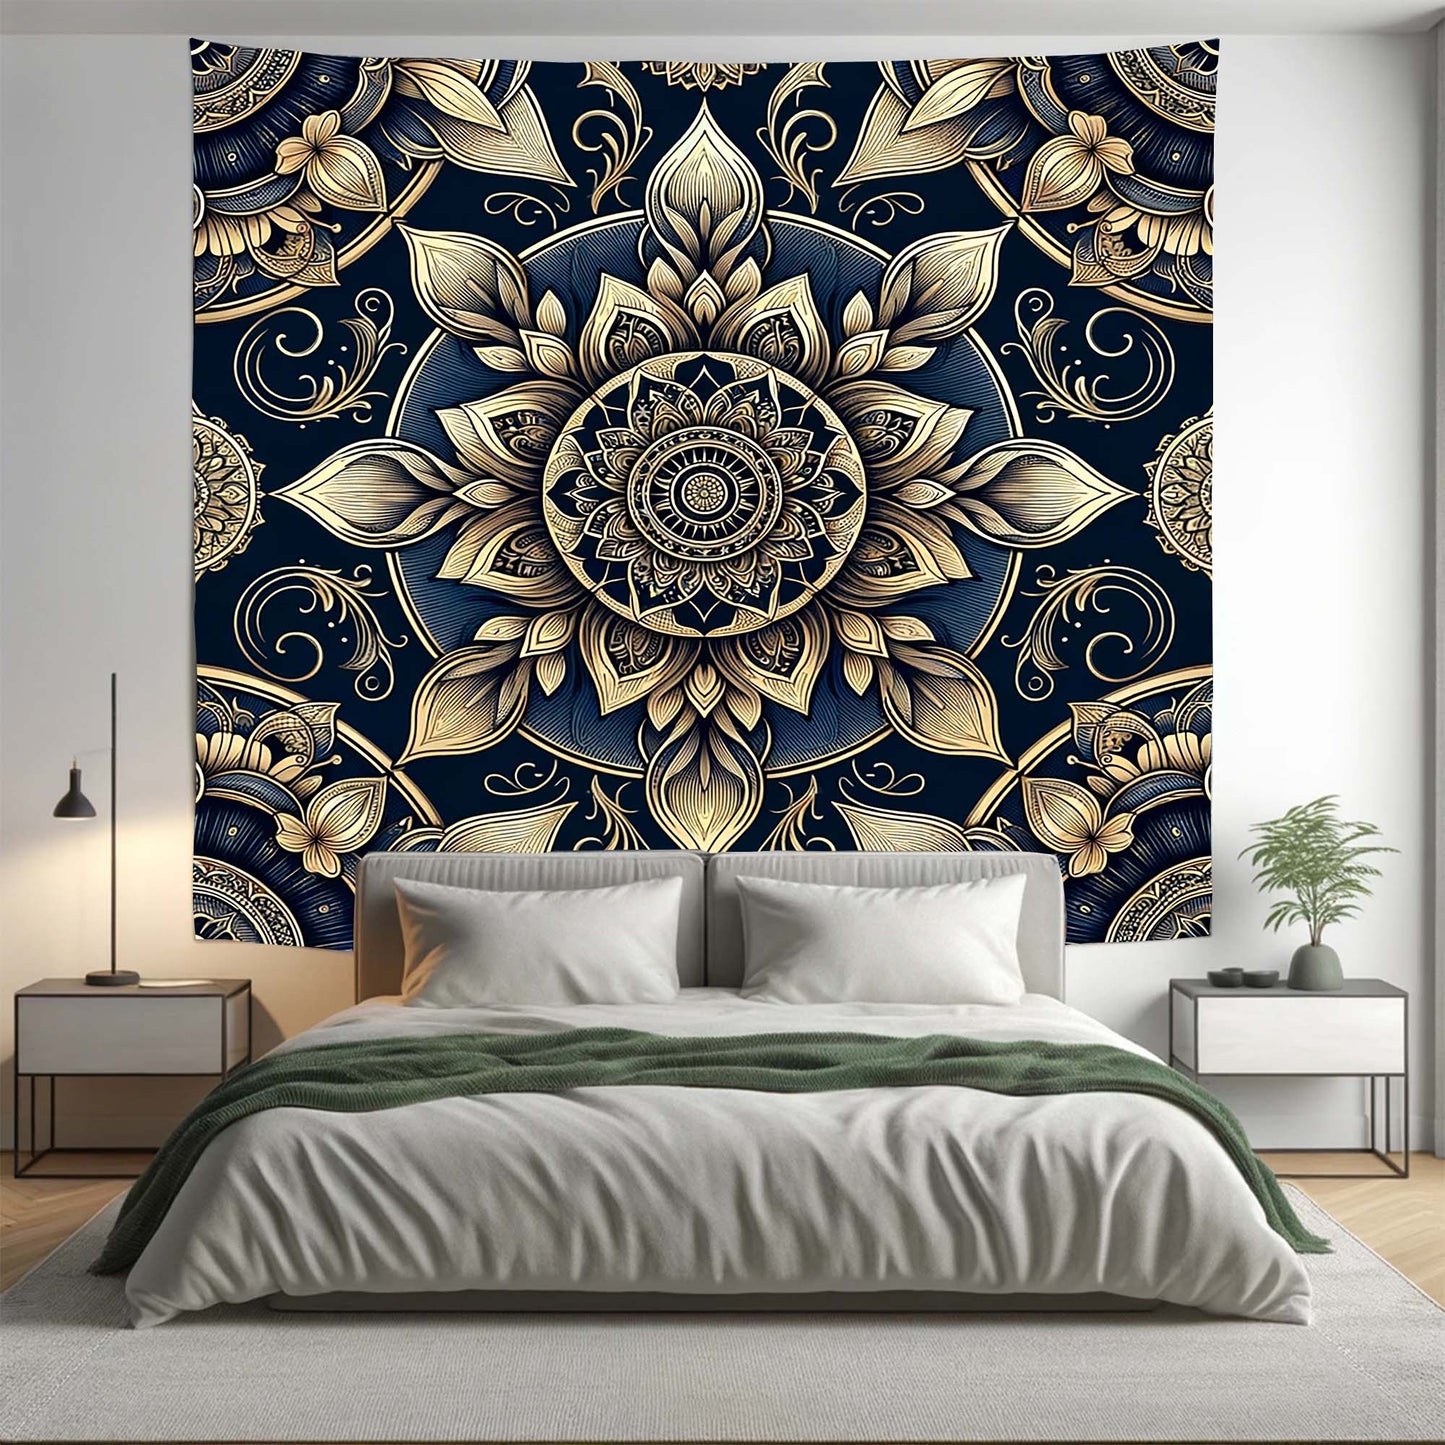 Bohemian Blue Gold ABS Floral Mandala Tapestry Psychedelic Wall Hanging Boho Decor